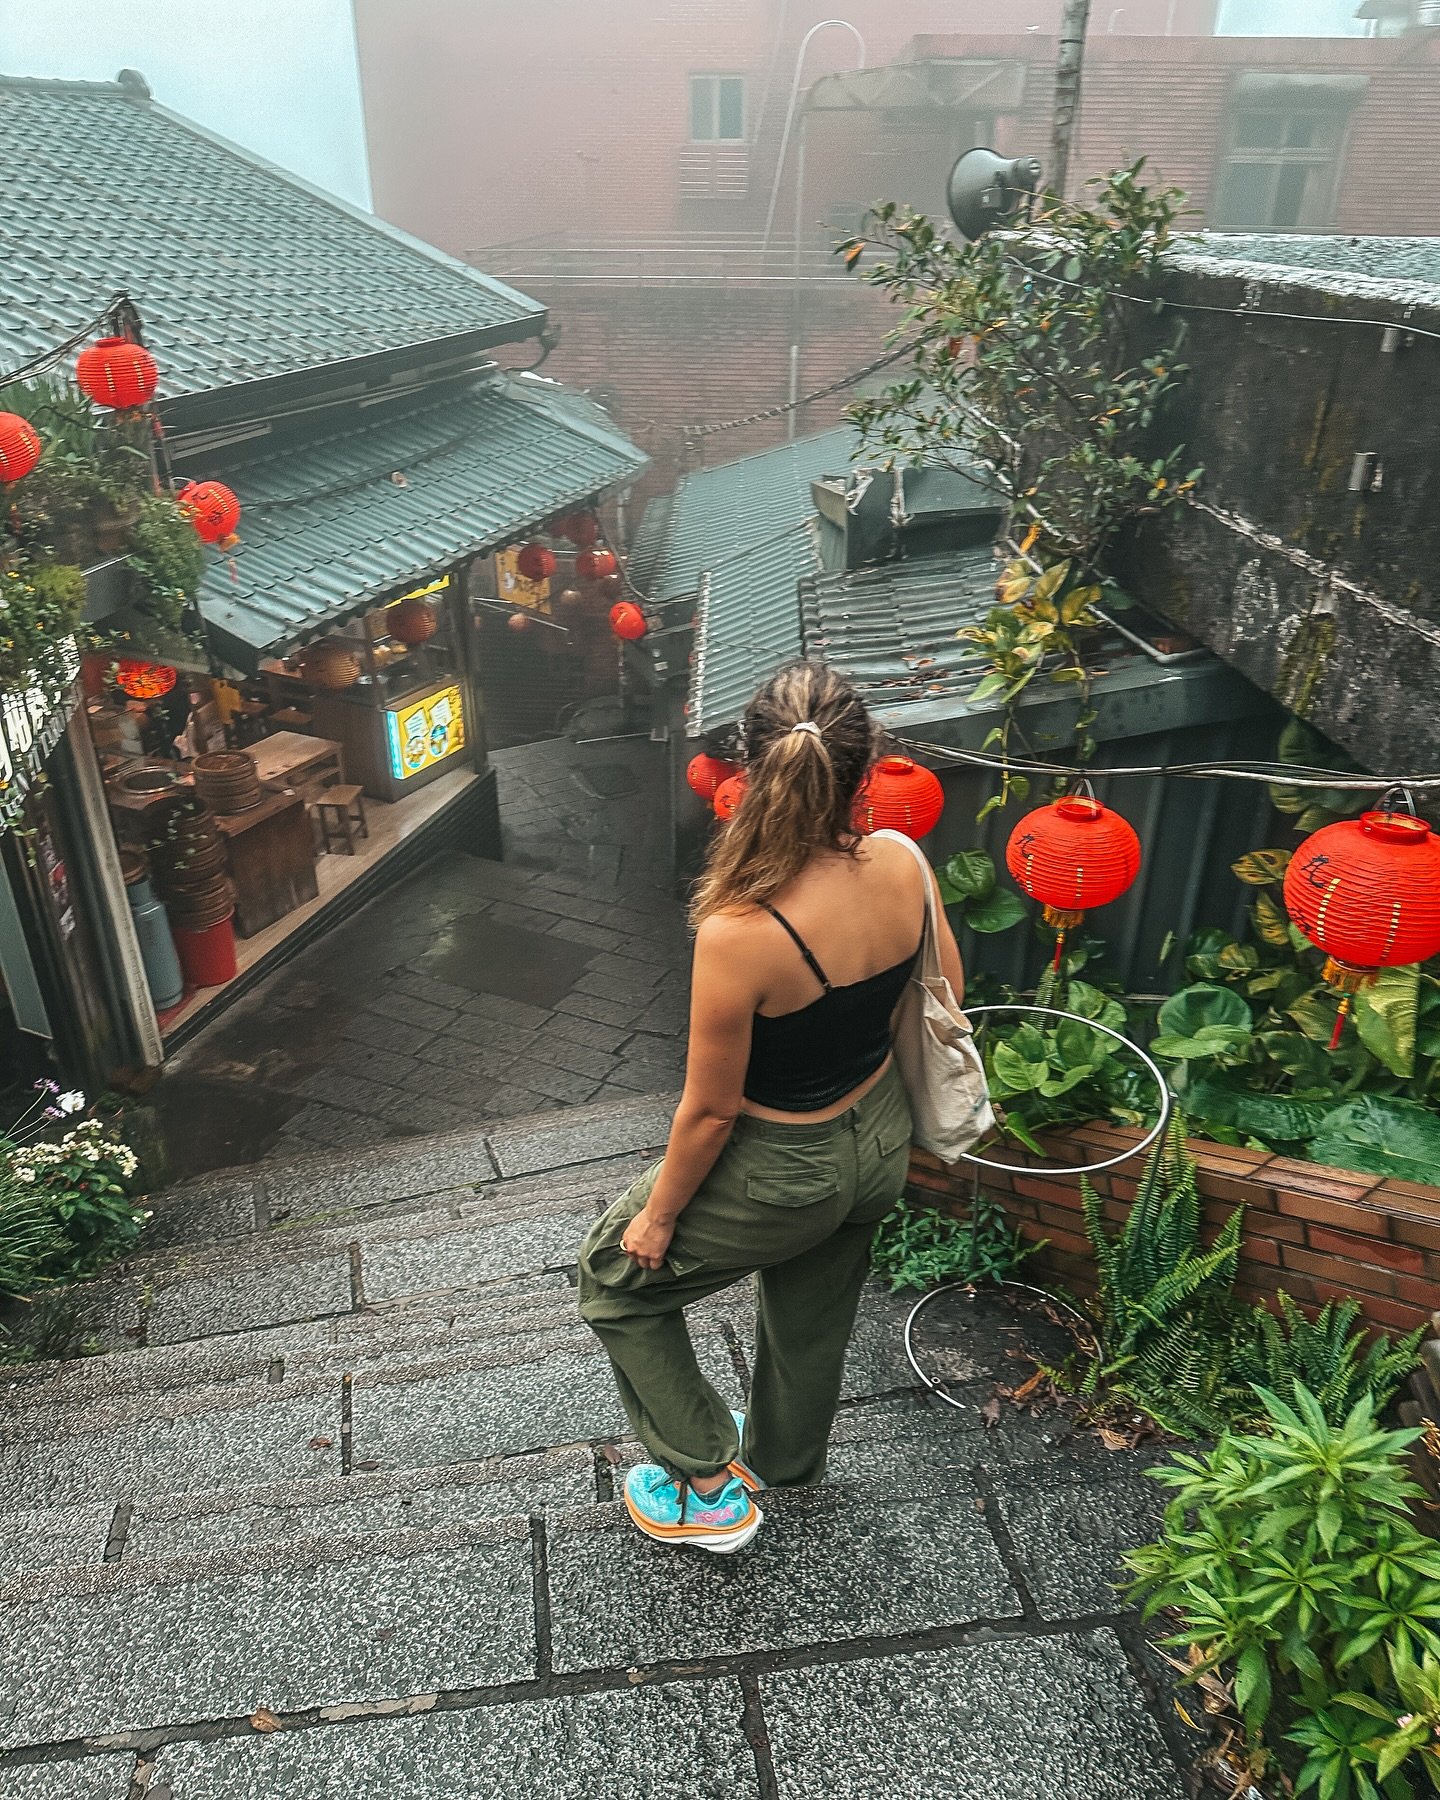 This week I&hellip;
✍️ wrote 8,088 words for The Nomad Detective 
☕️ kept up with client projects 
🧋drank lots of tea
⛰️explored the village of Jiufen and night markets of Taipei with @kylefcords 💕
💻 finished my &ldquo;working remotely&rdquo; trav